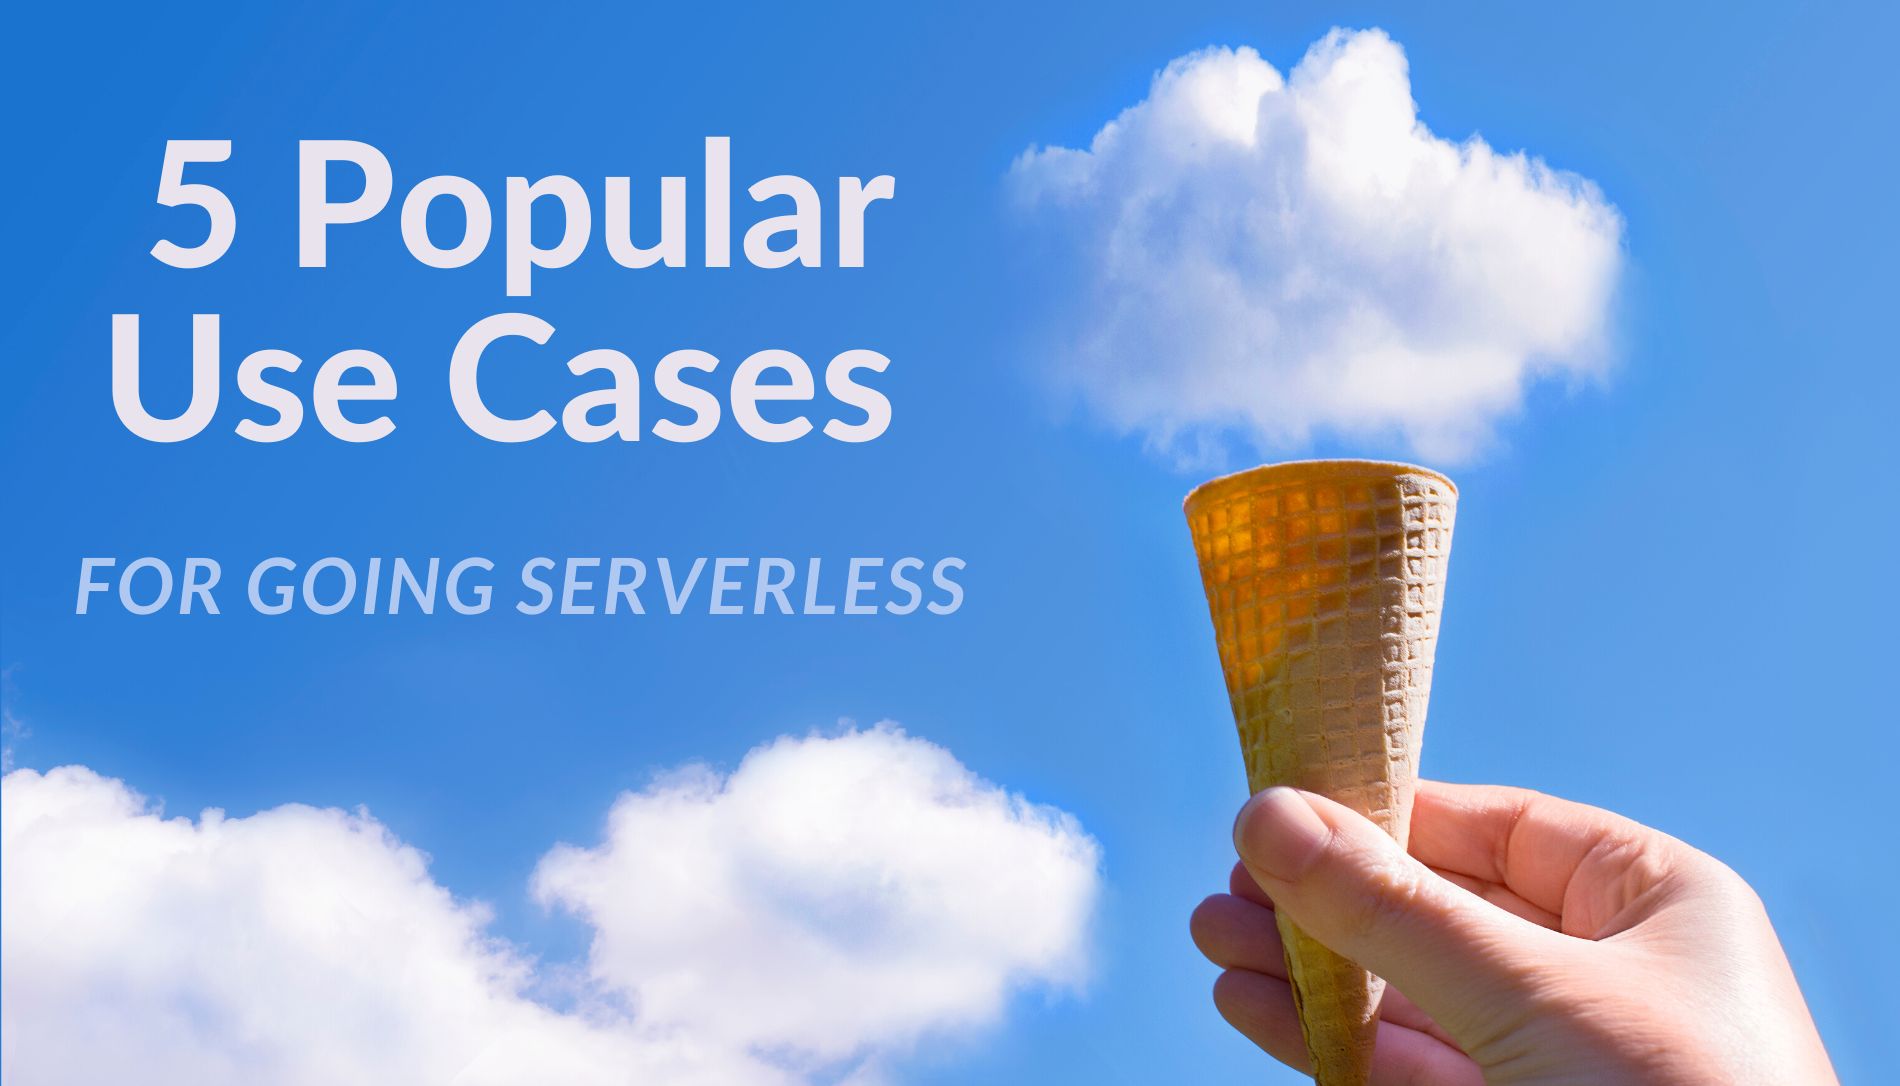 featured image - Going Serverless? Here’s 5 Use Cases